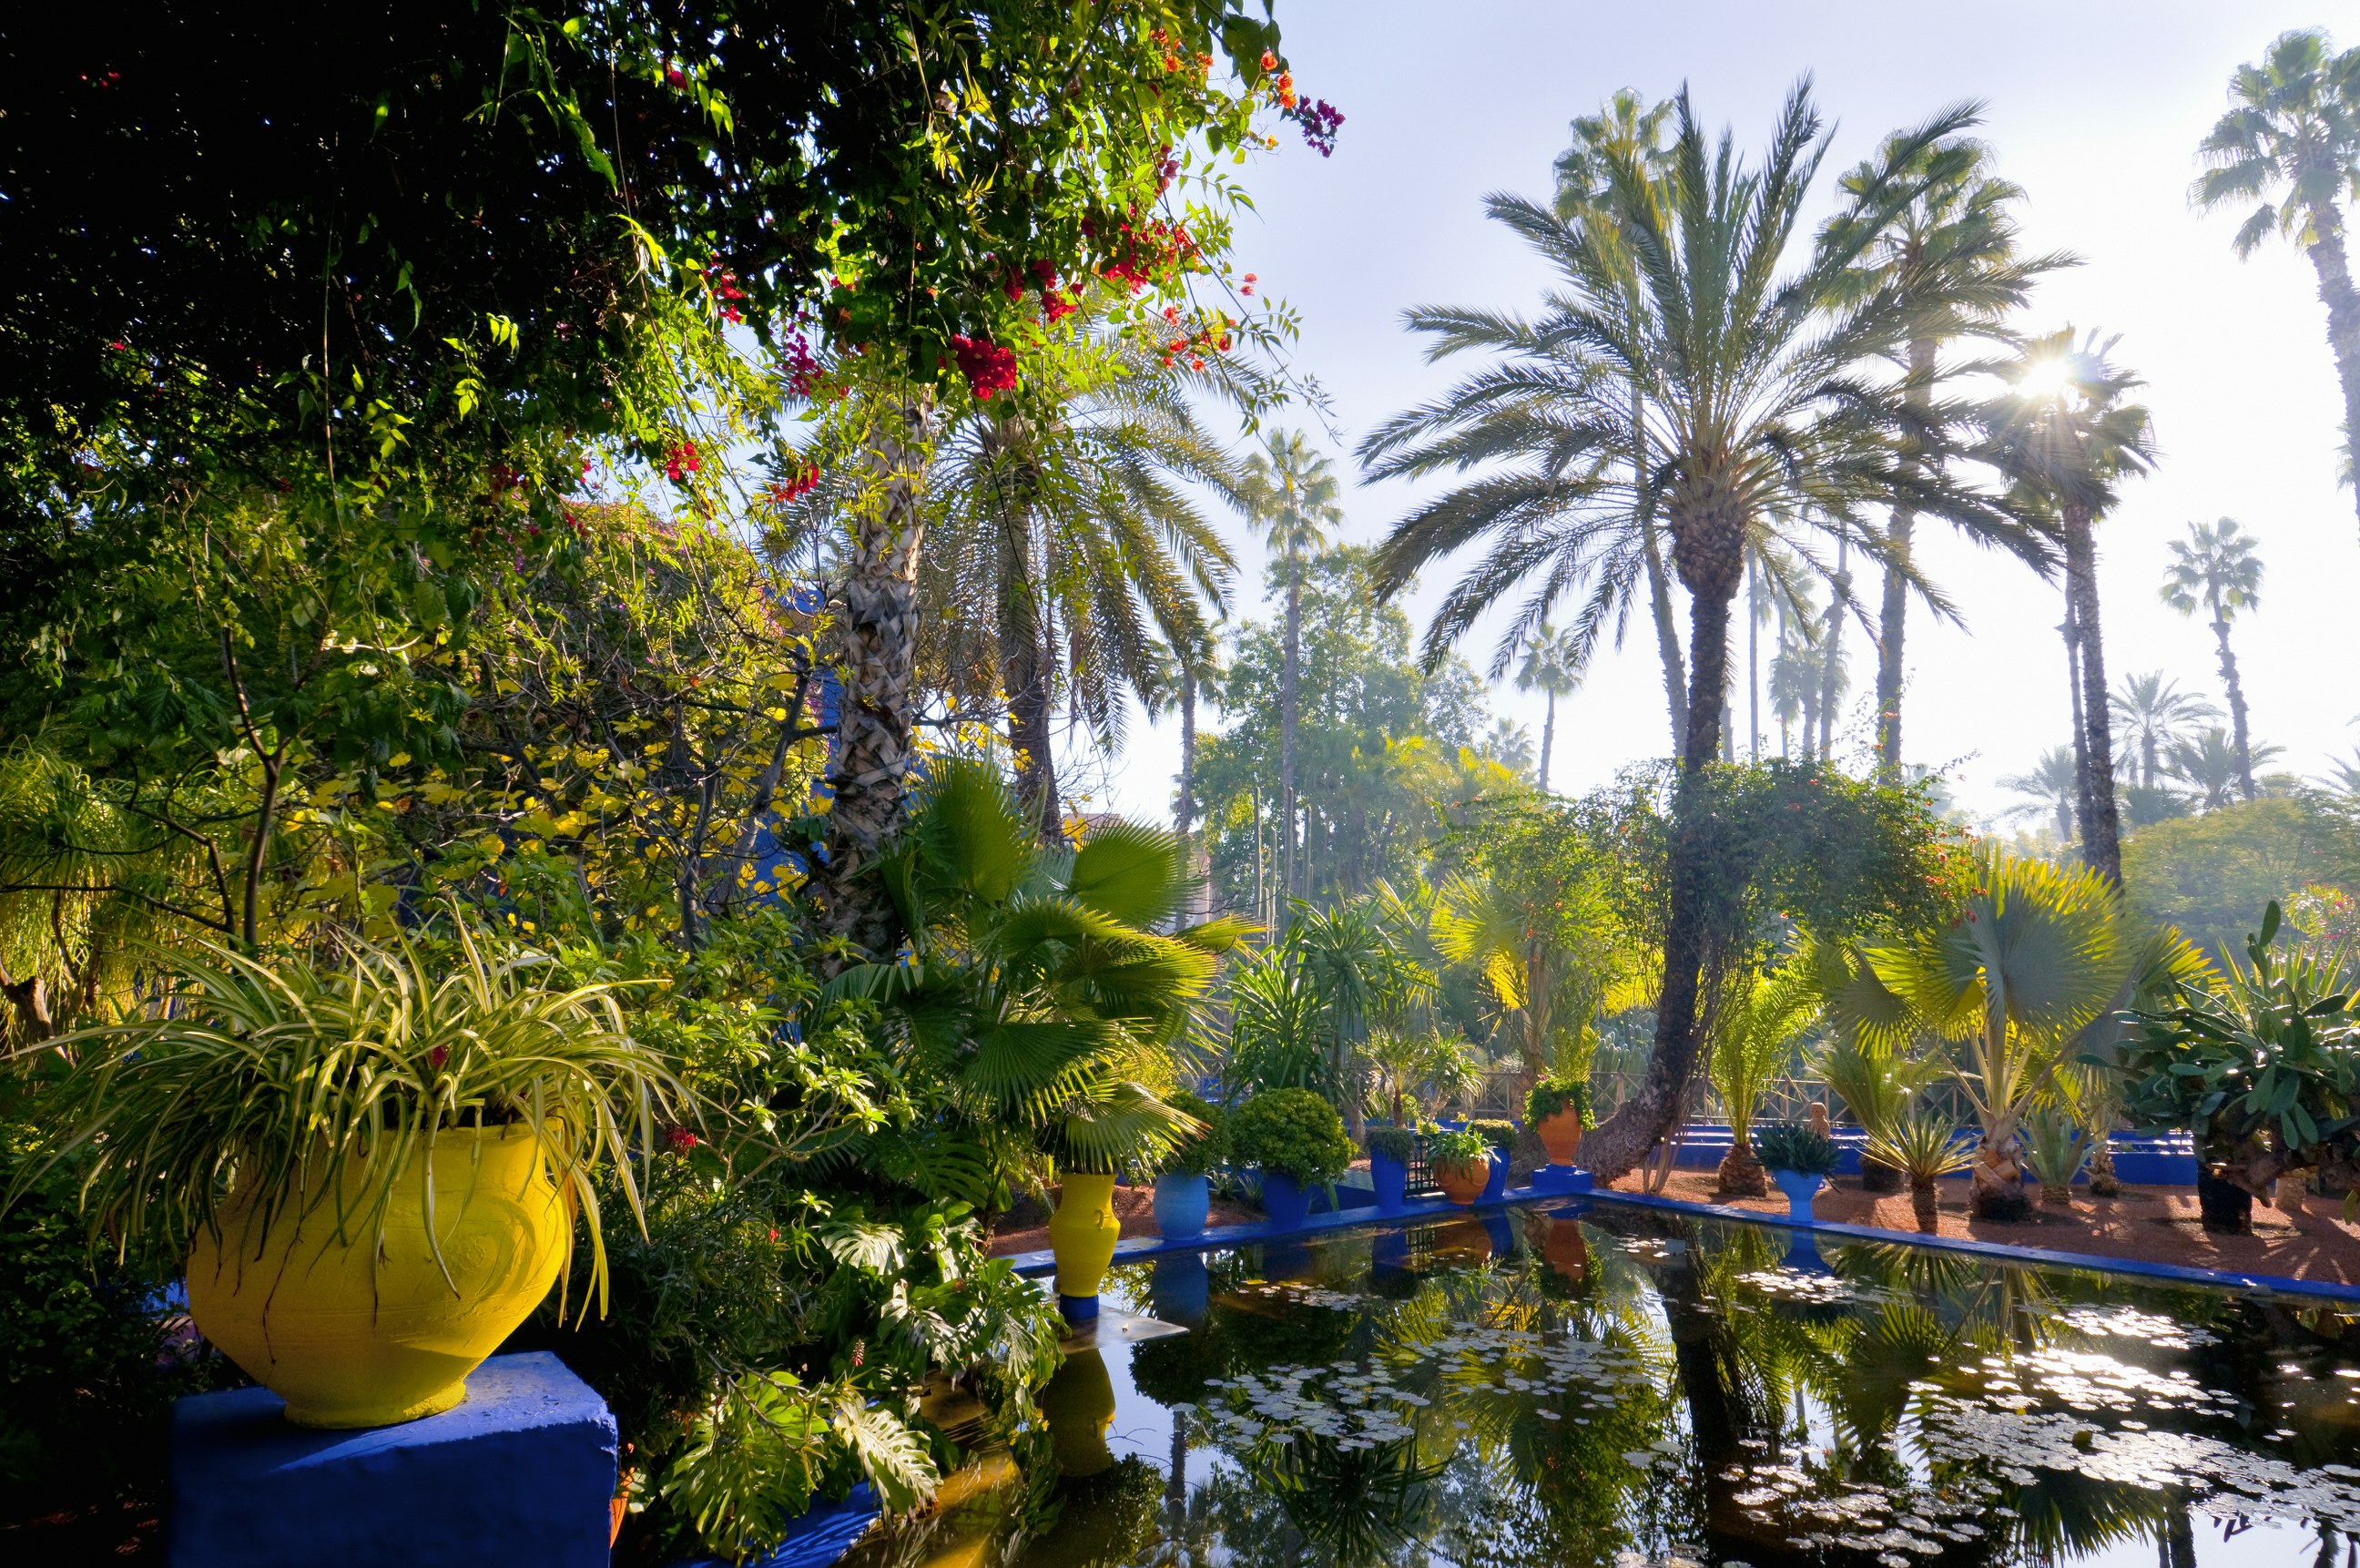 An atmospheric image shot into the sun, with light beams shining beneath palm trees and lighting up the leaves; in the foreground is a pond covered in water lilies.